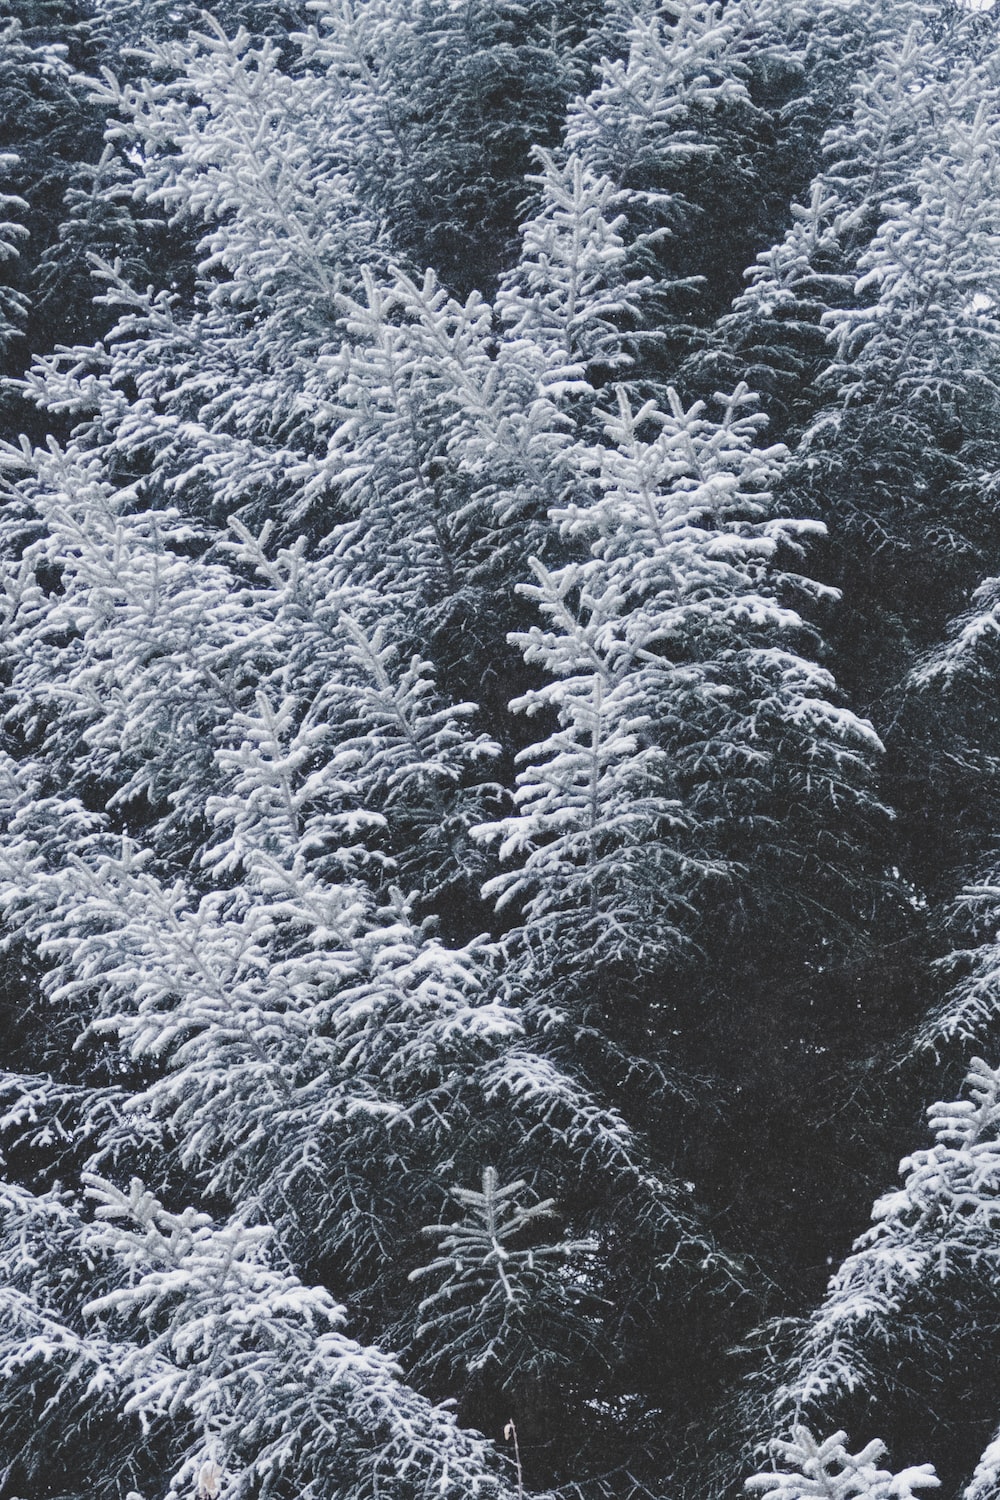 Winter Texture Picture. Download Free Image